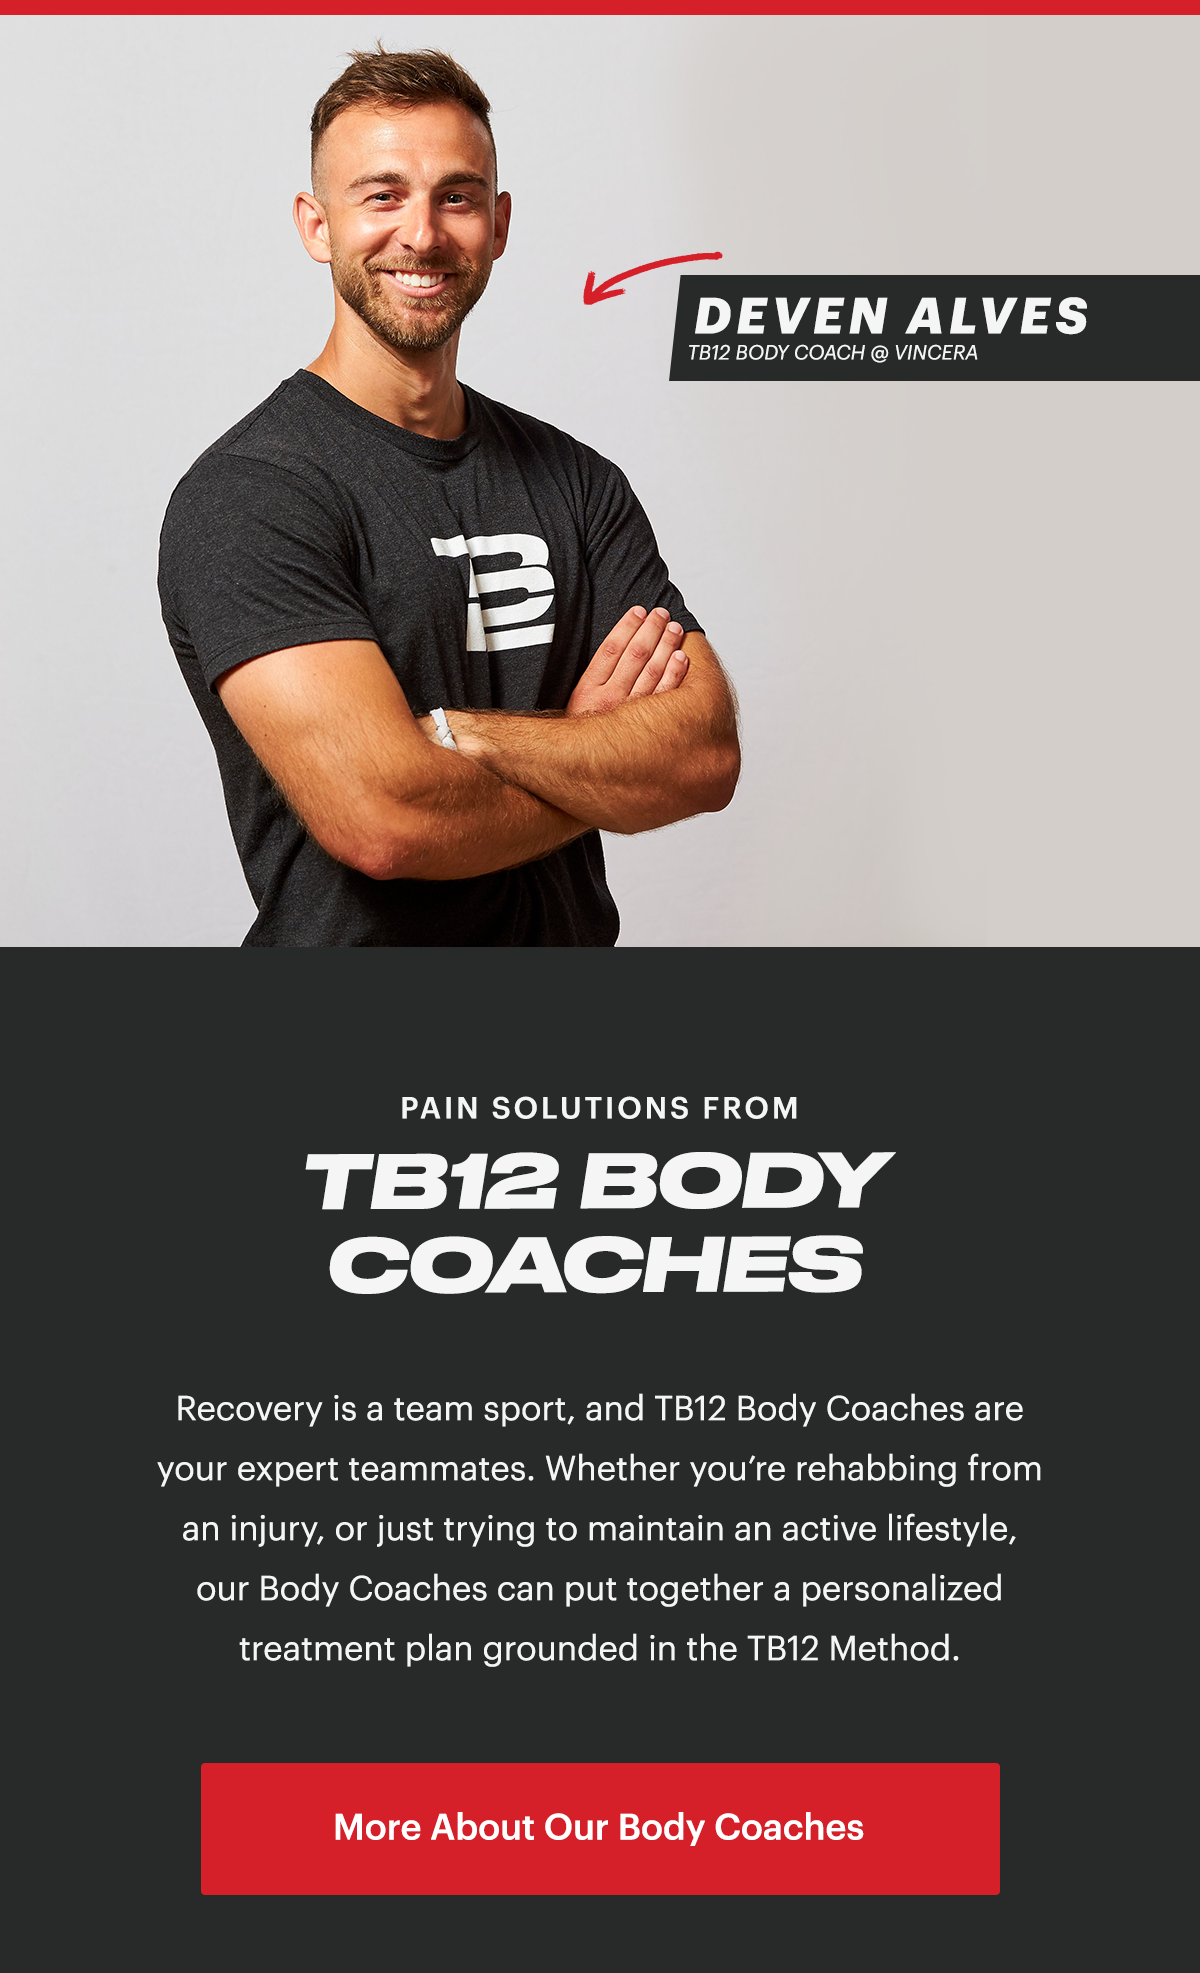 About TB12 Body Coaches